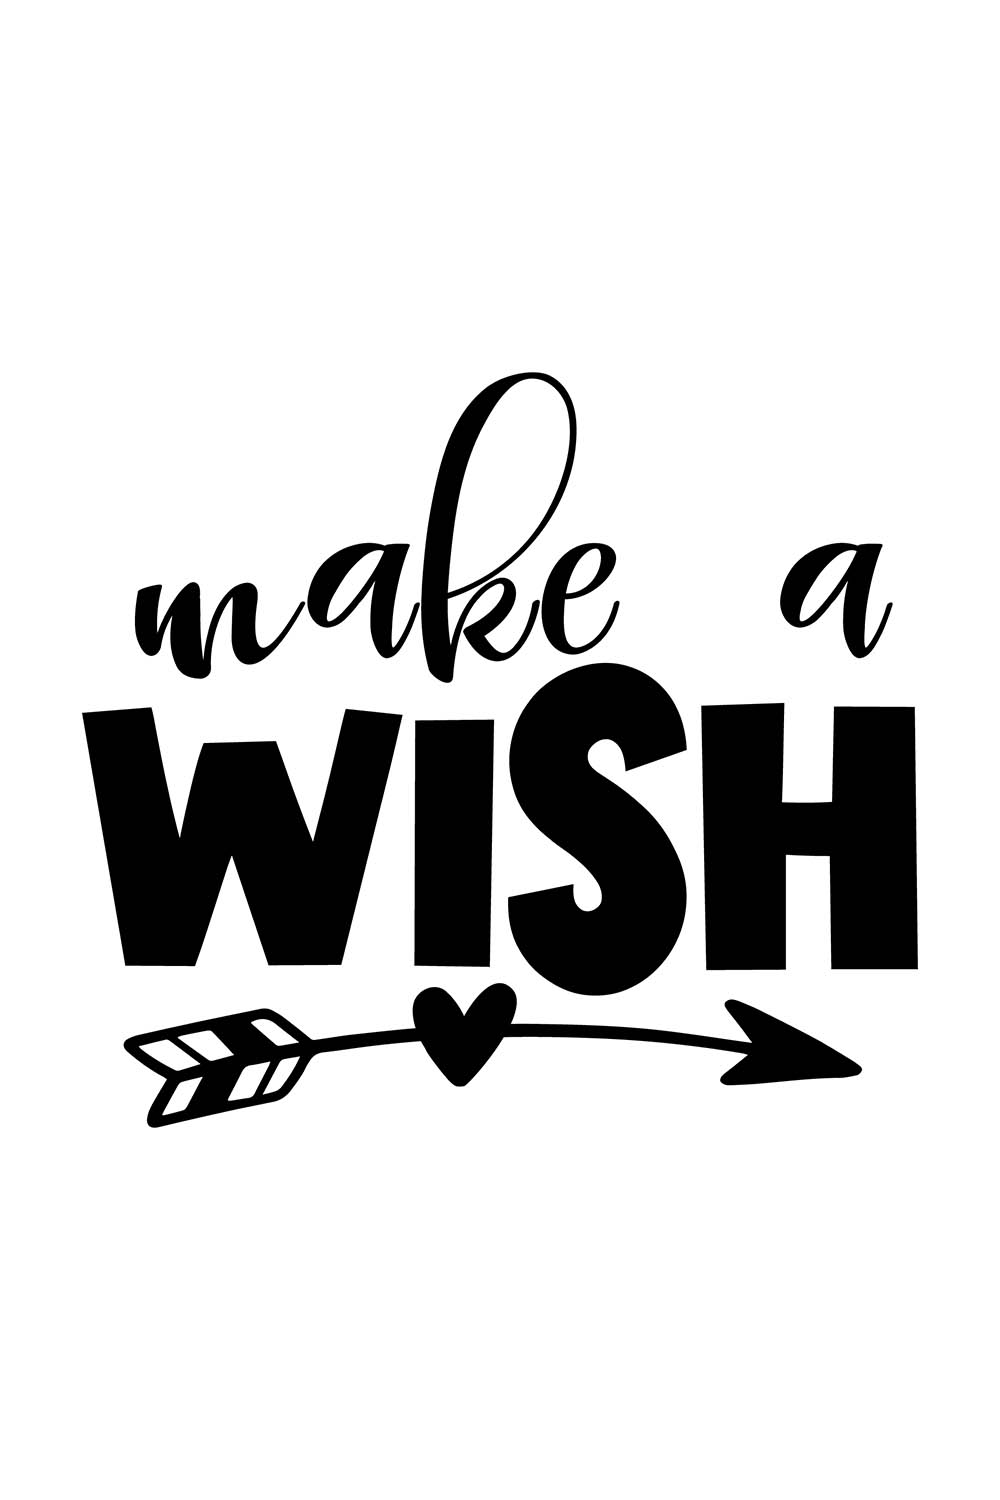 Image with exquisite black lettering for Make a Wish prints.